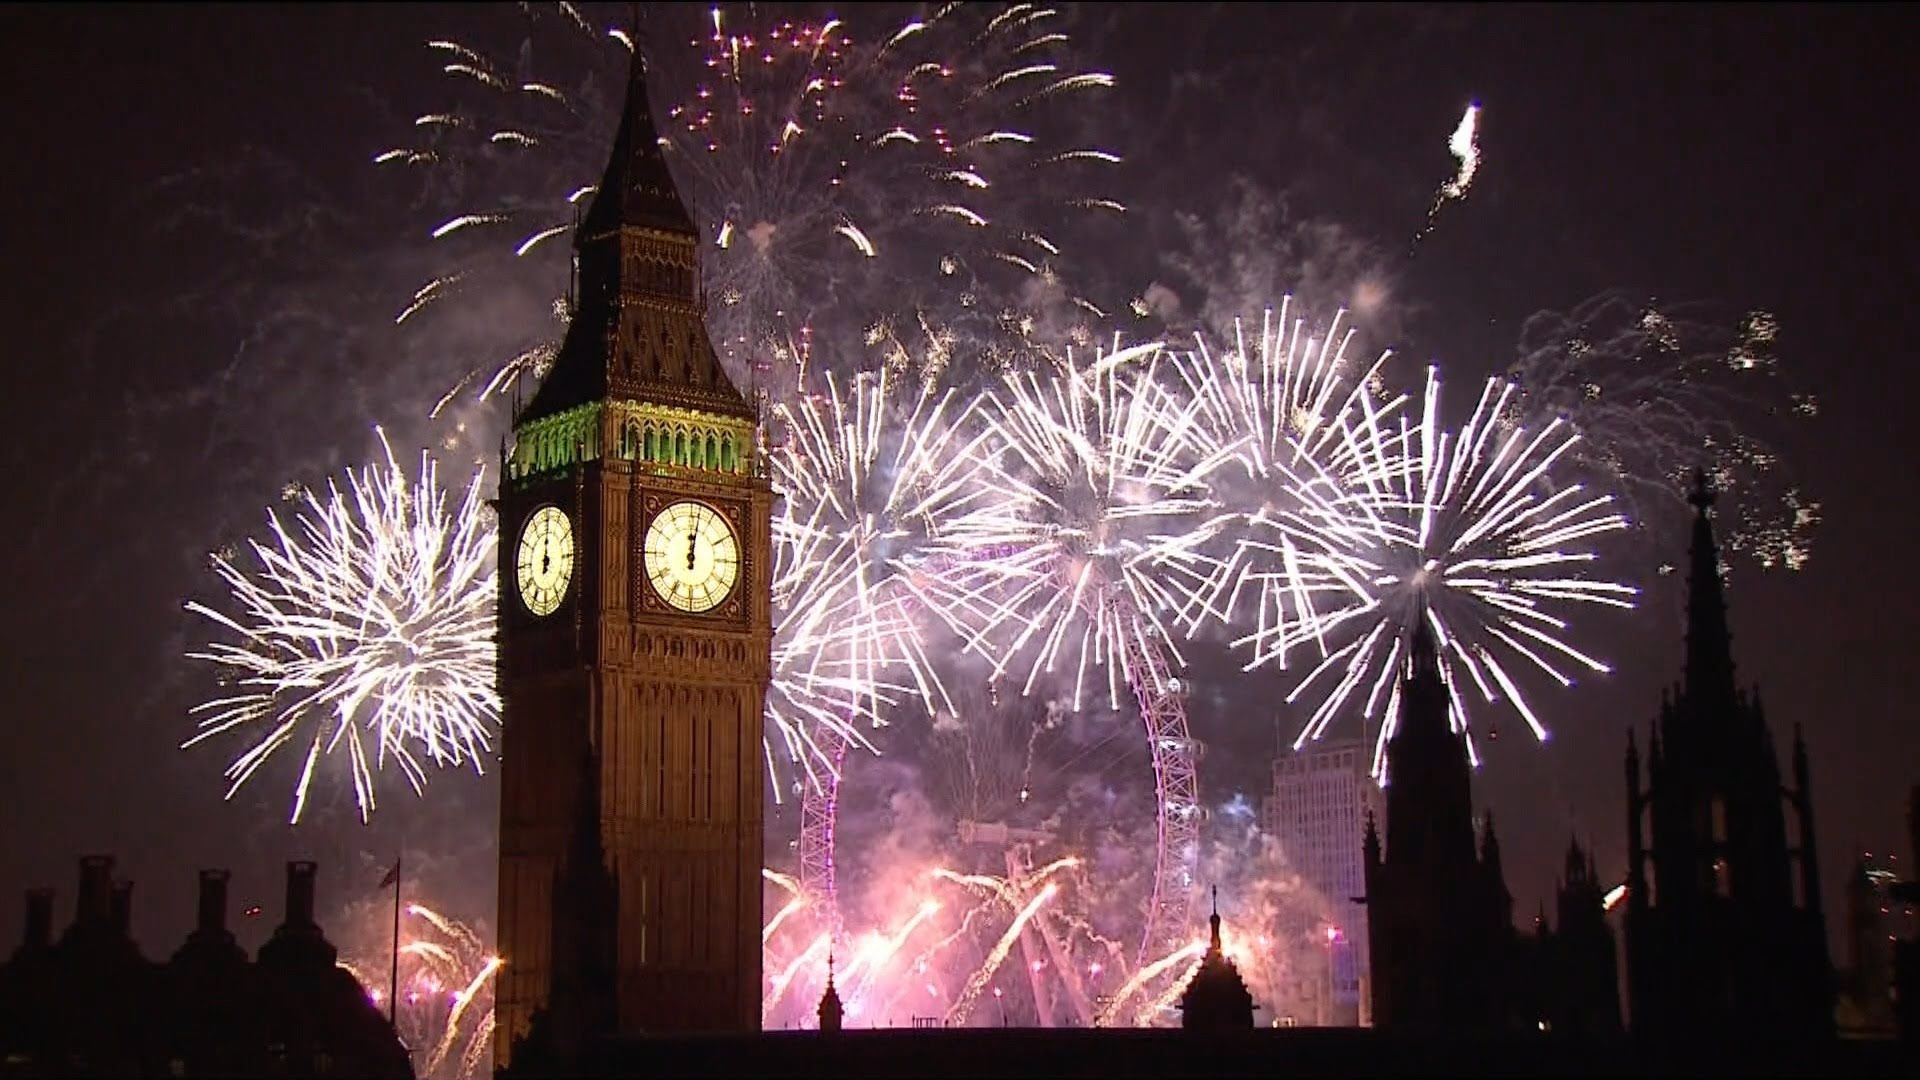 2017: New Year, New Me. New years eve fireworks, New year's eve in london, London fireworks